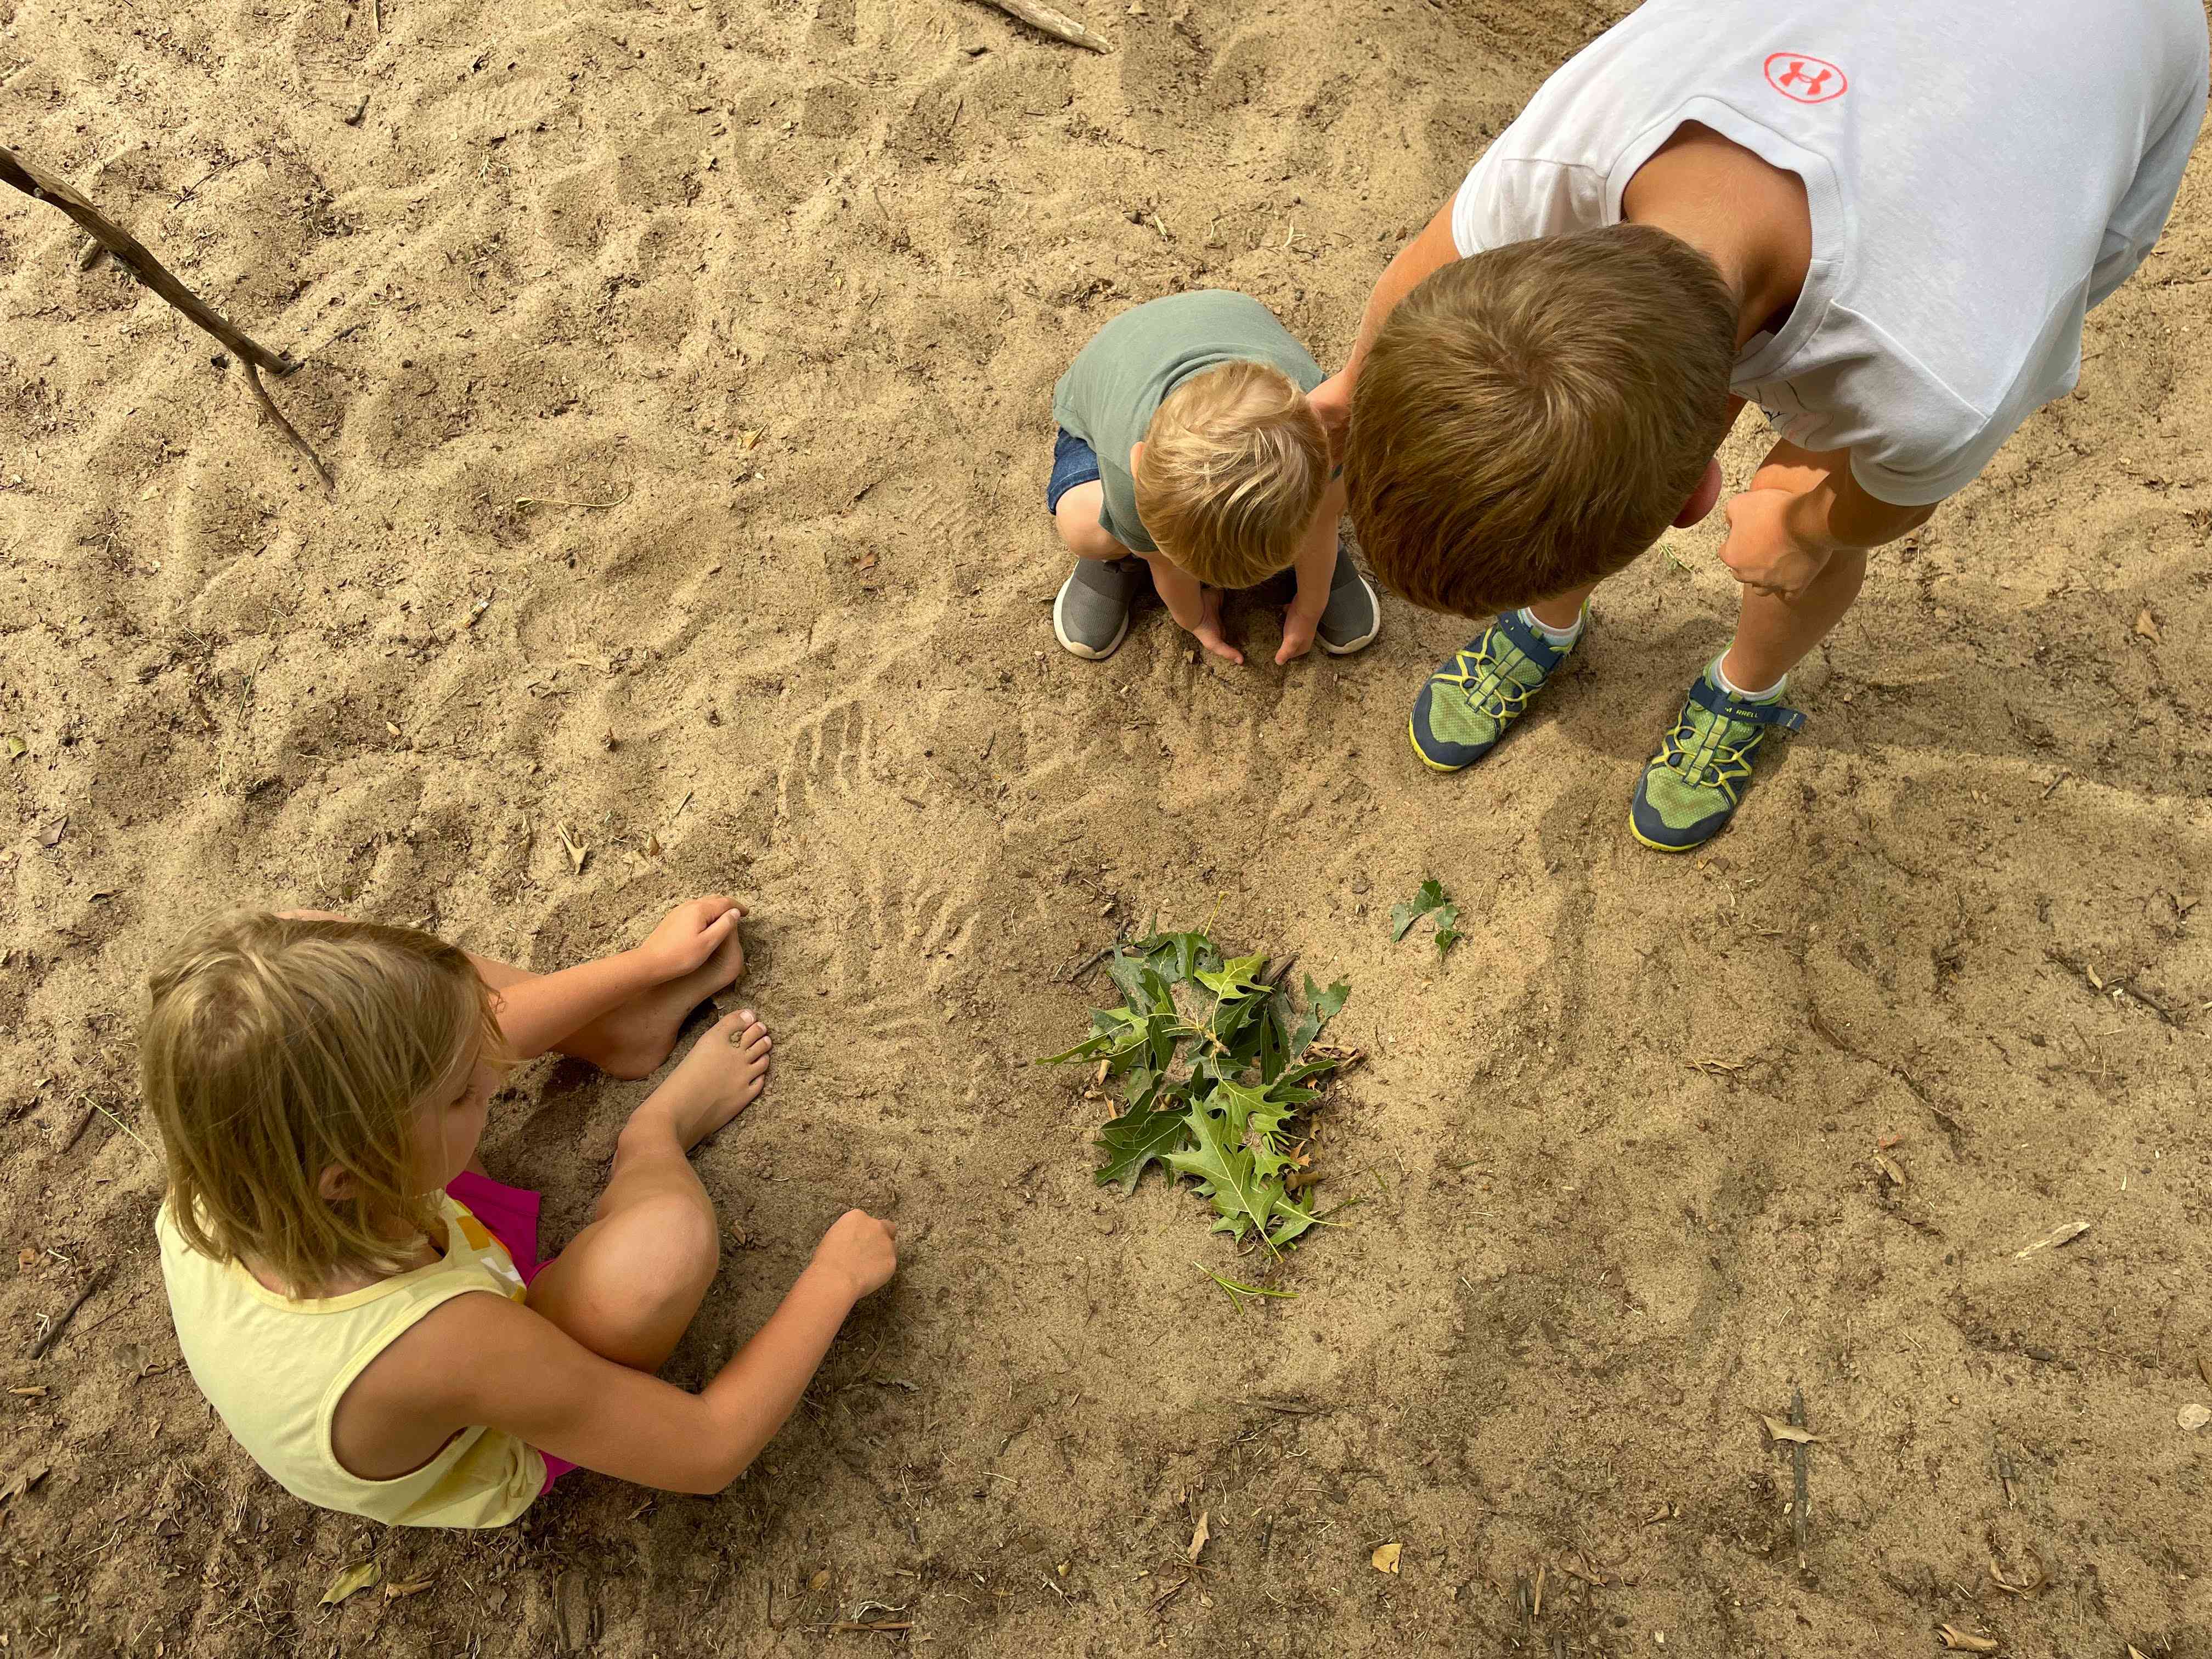 Children dig a shallow hole and fill it with leaves in sticks in a pretend game of “cooking soup.”